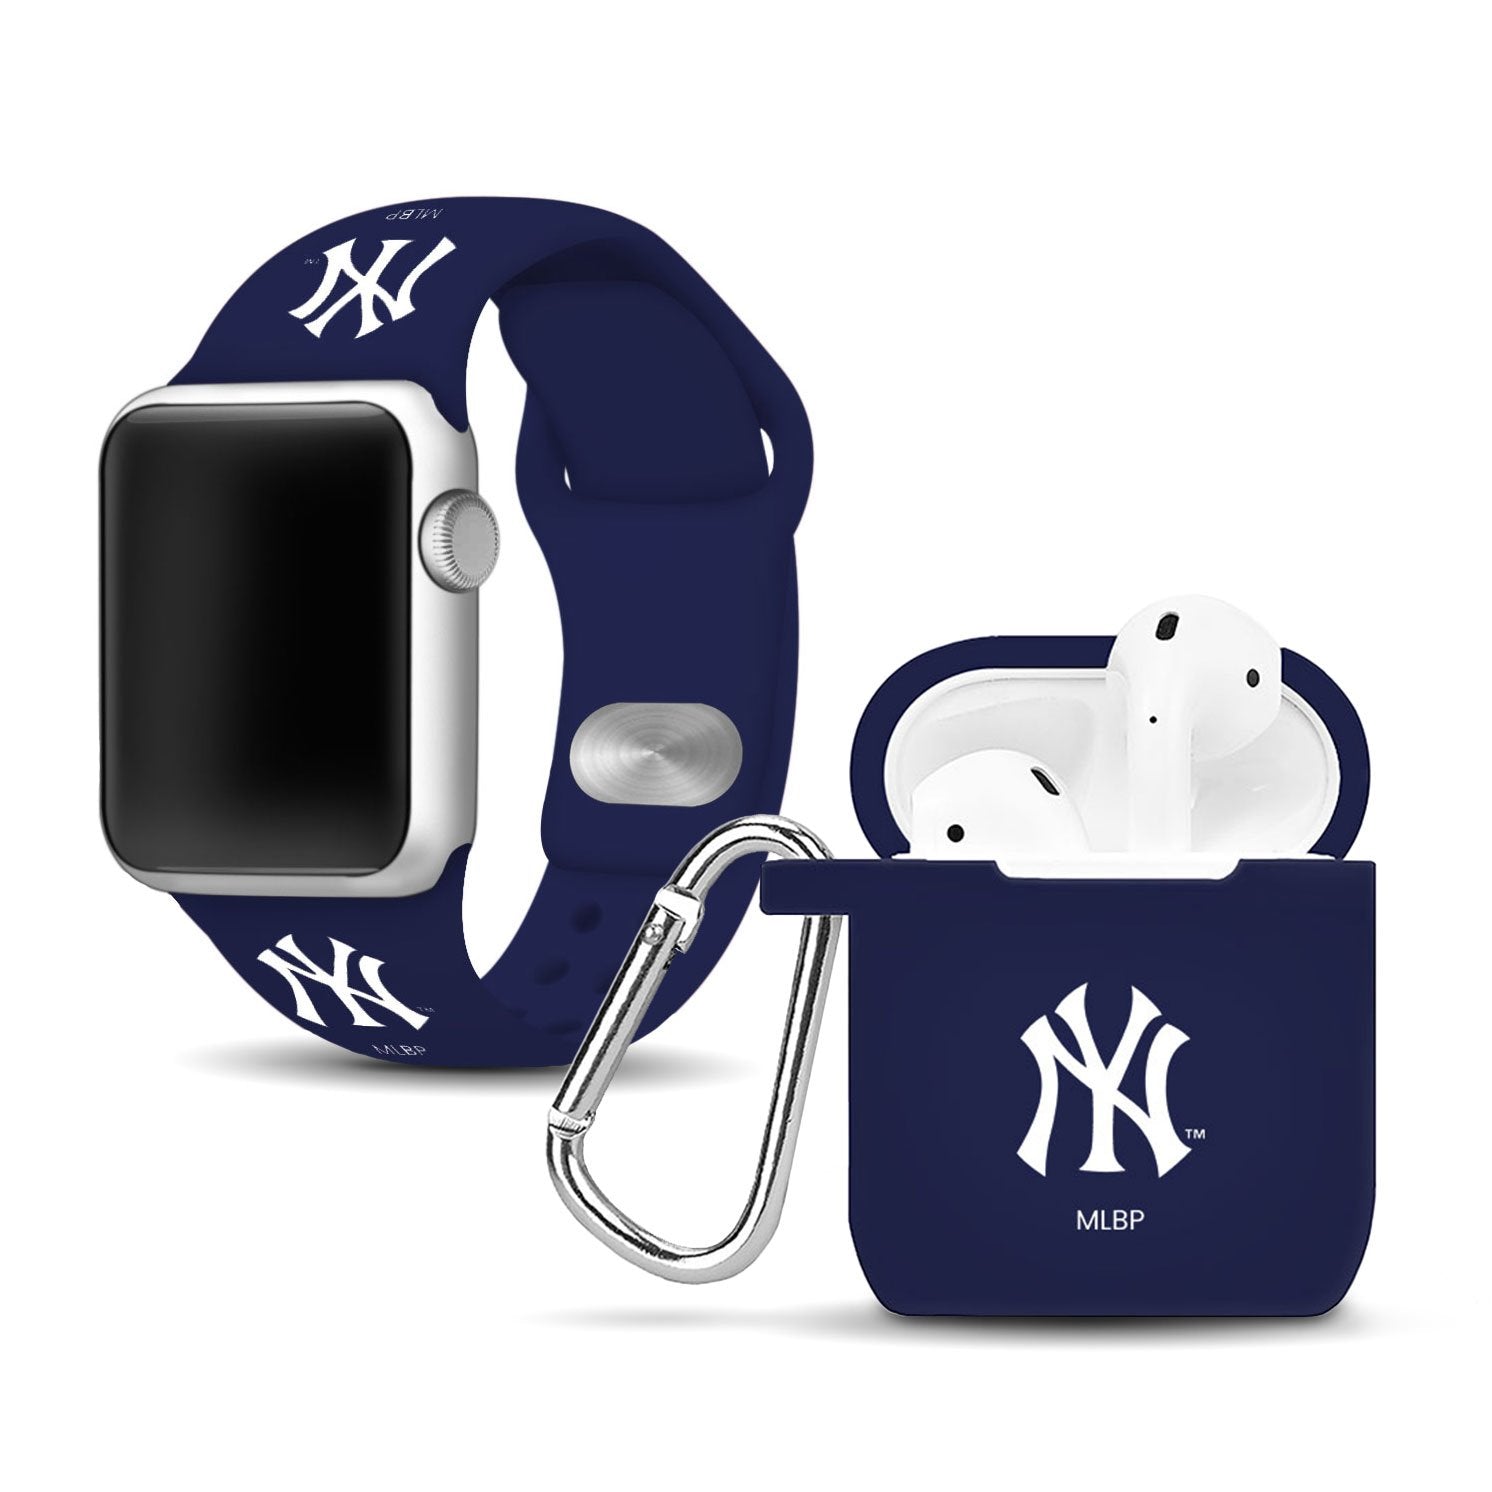 Mlb New York Yankees Apple Watch Compatible Leather Band - Tan